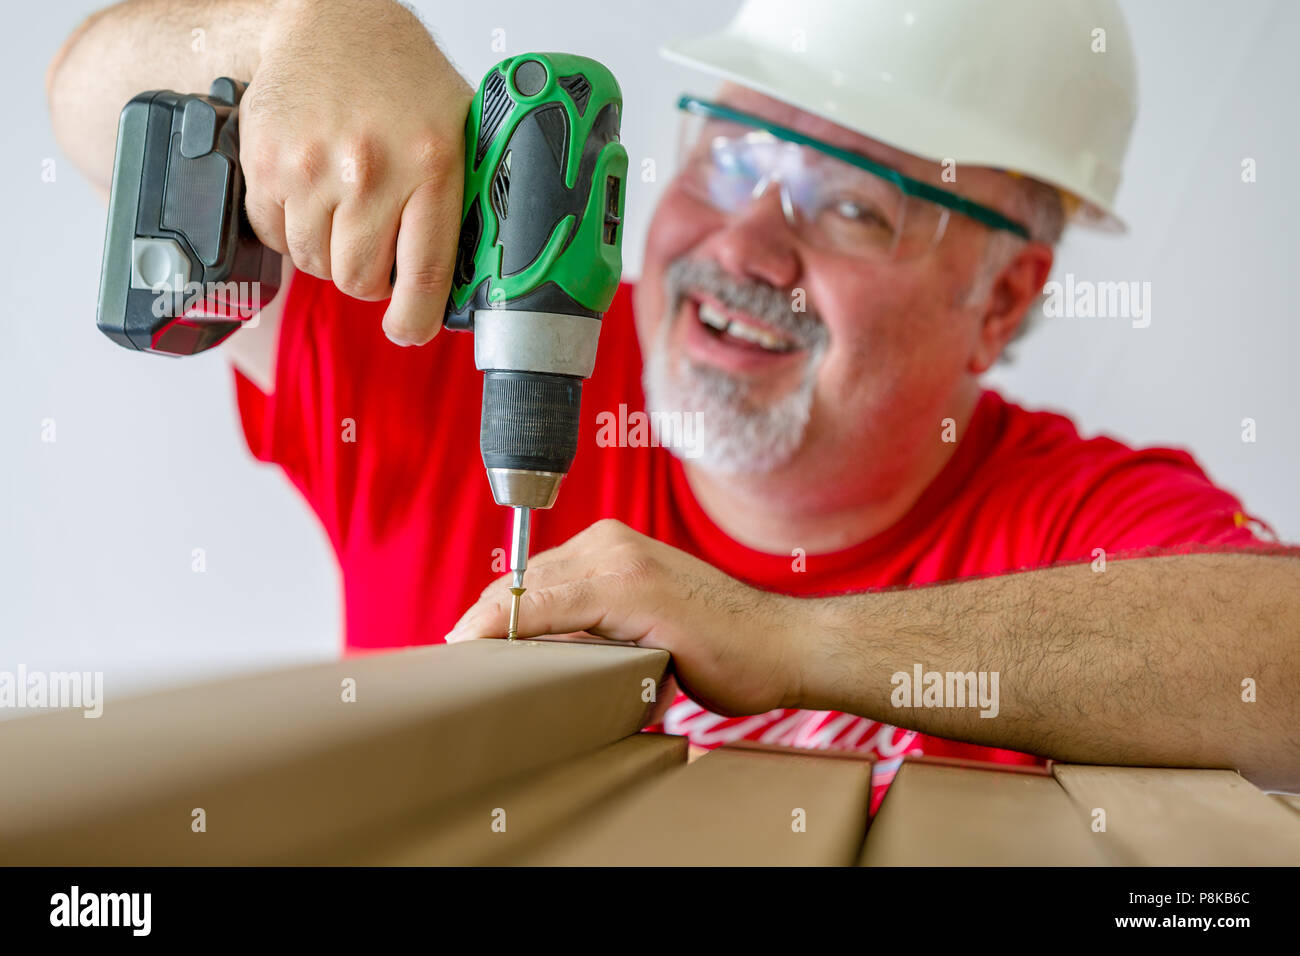 Portrait of smiling man using drill-drive while building wooden construction Stock Photo